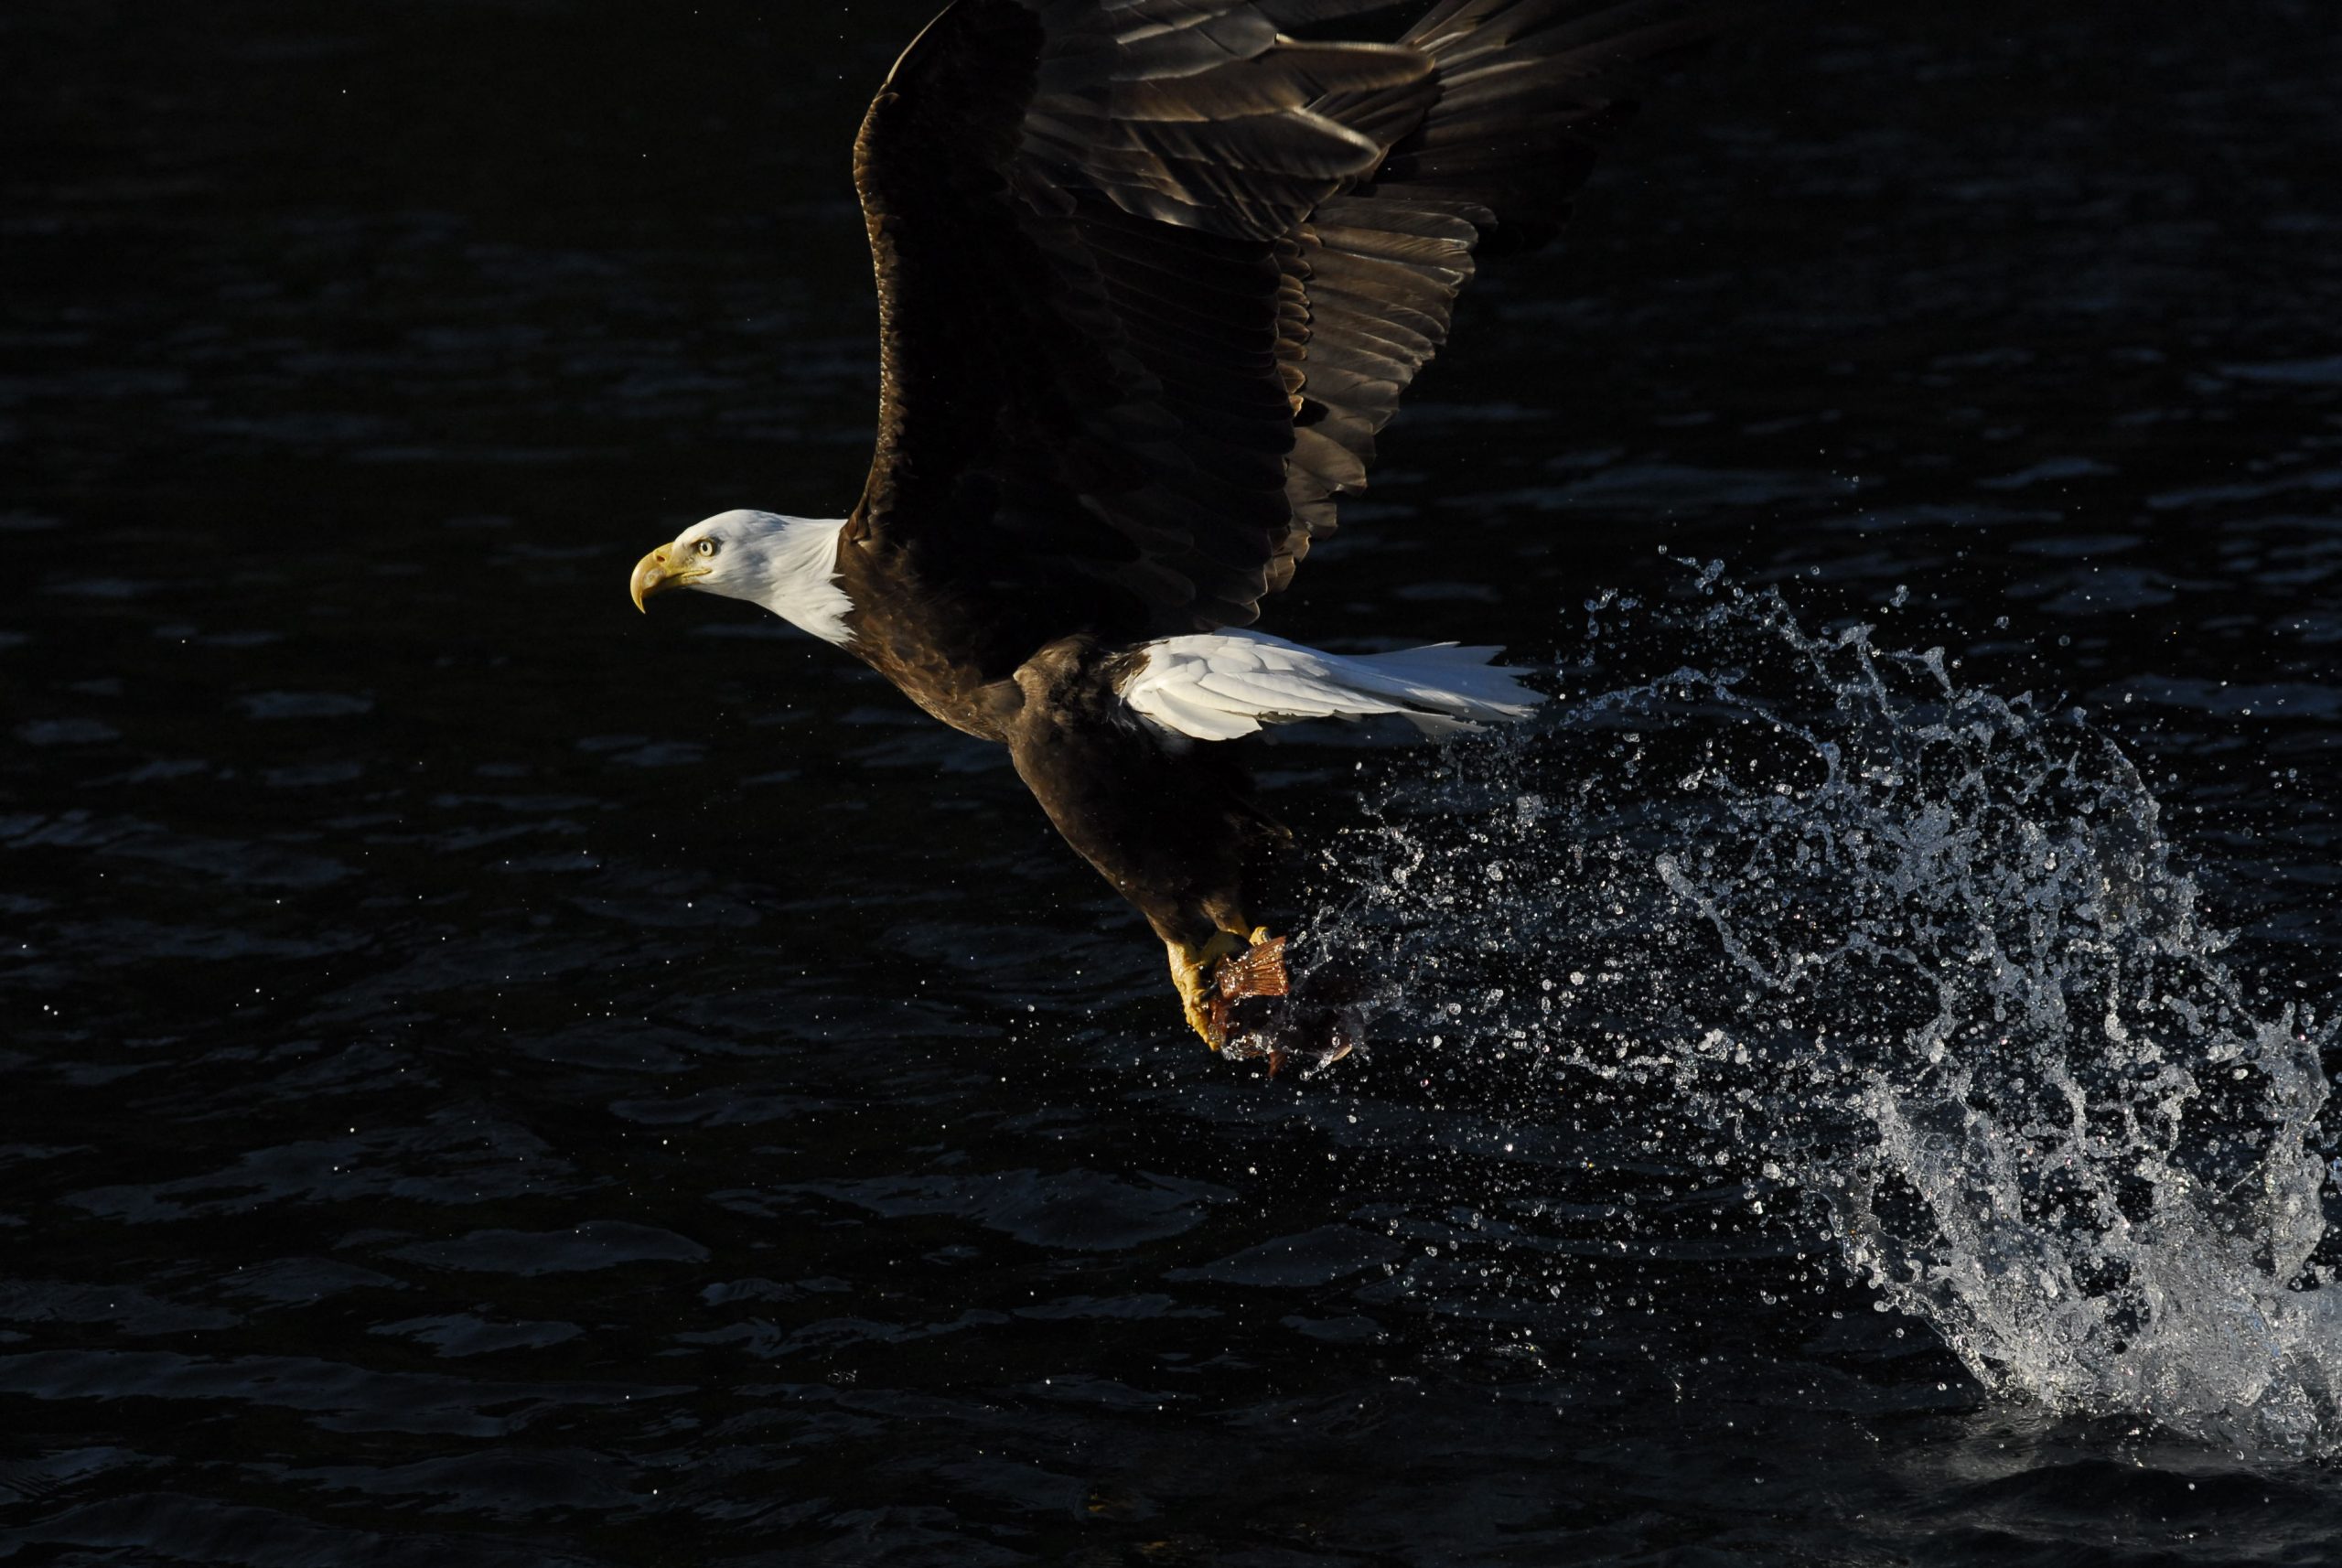 Bald Eagle with Fish in Talons Flying Low Over Dark Waters